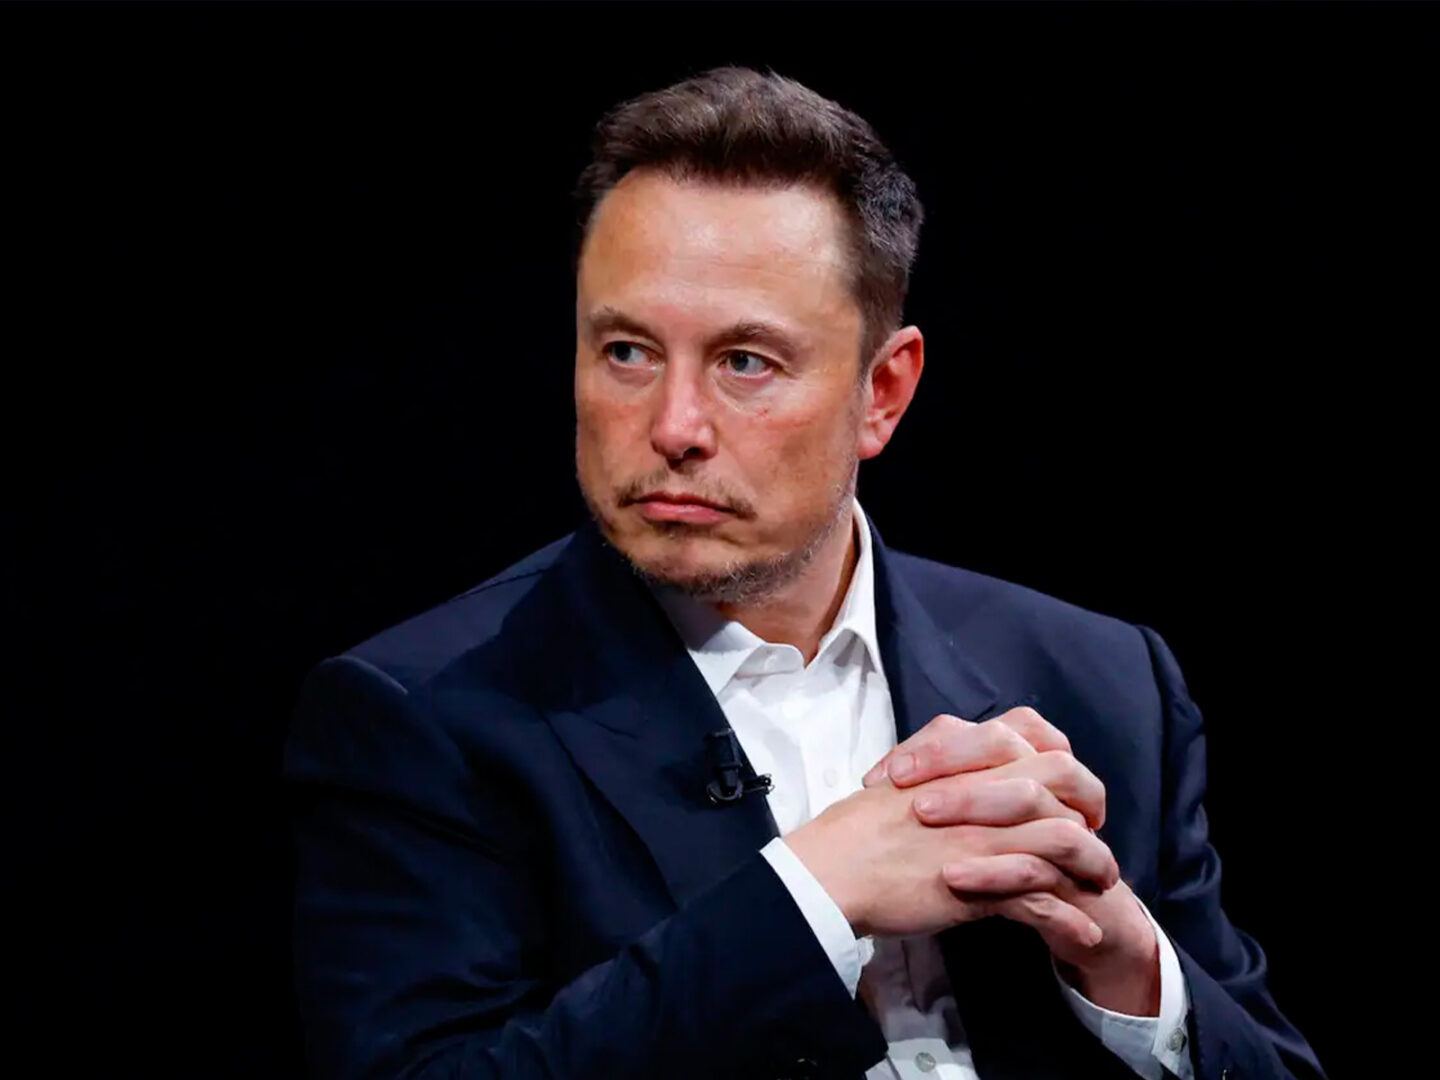 Elon Musk offers Wikipedia a billion dollars if it changes its name to “Dickipedia”